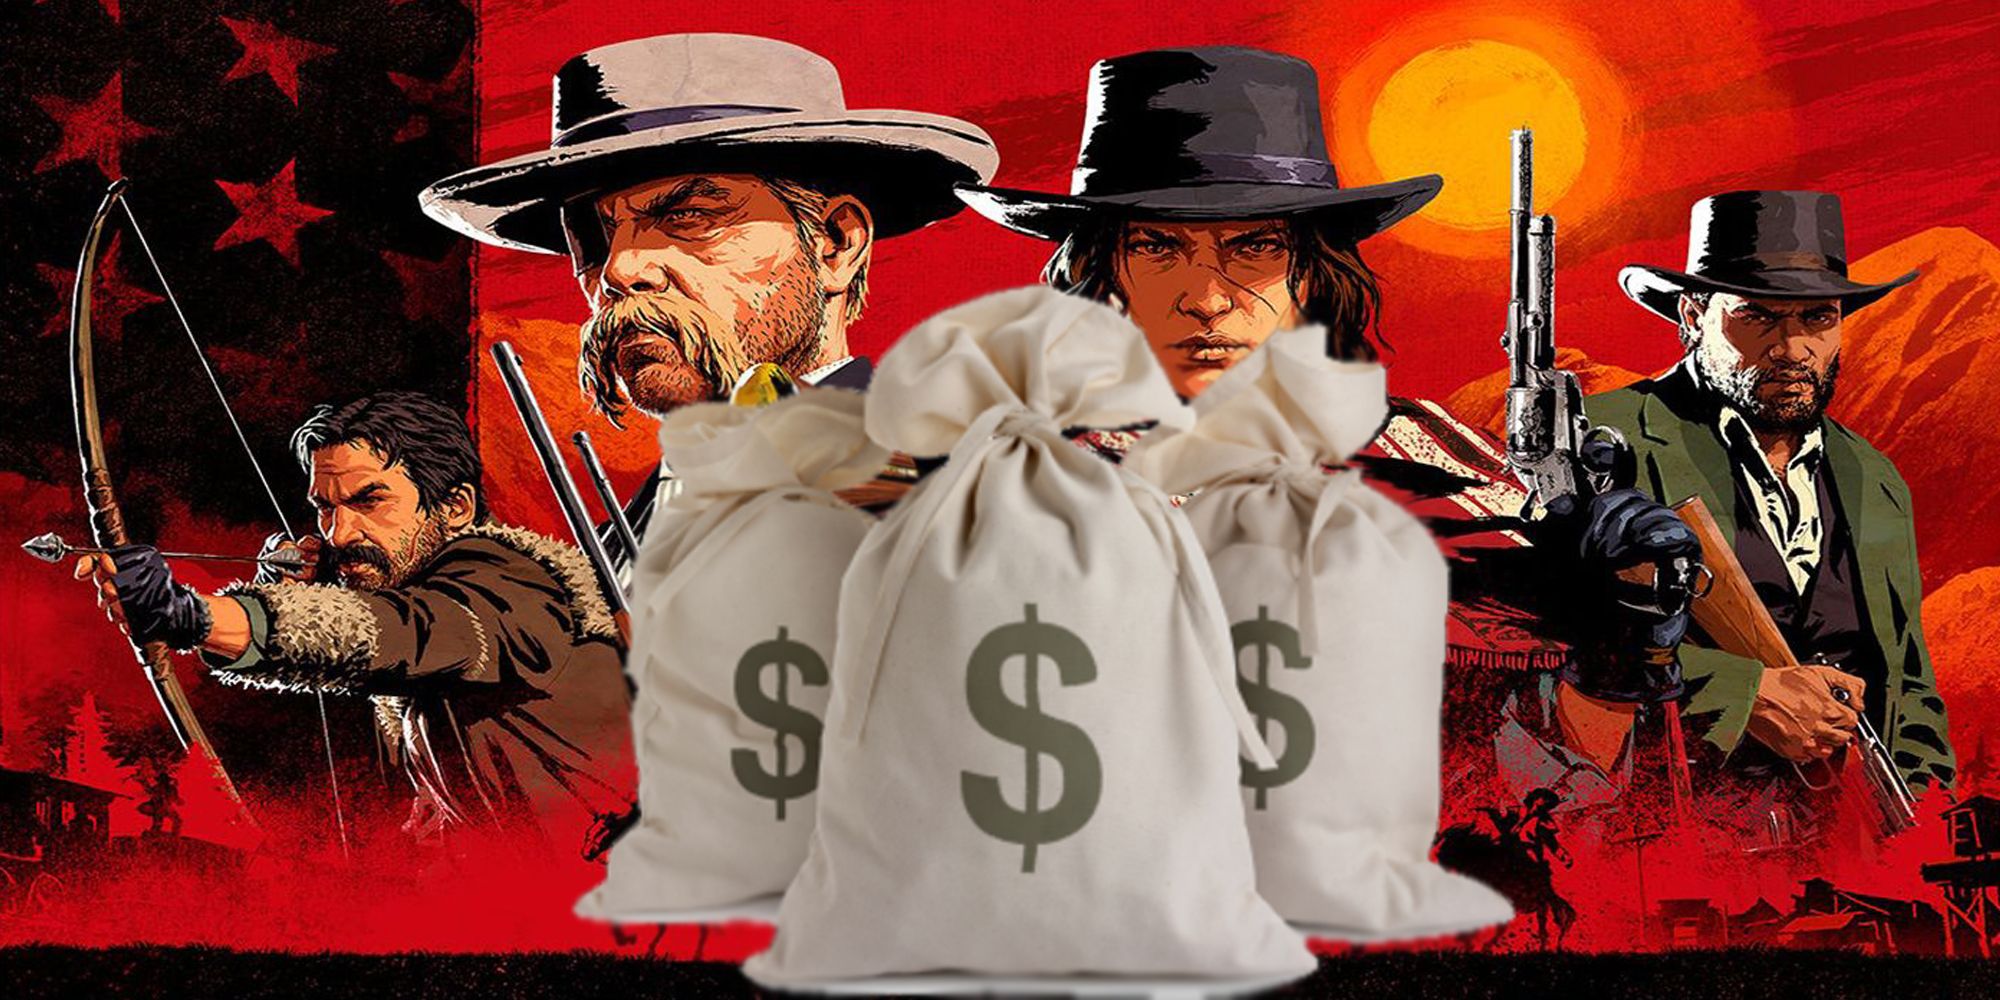 Red Dead Online's Biggest Problem Is Not That It Costs $600 To Buy  Everything